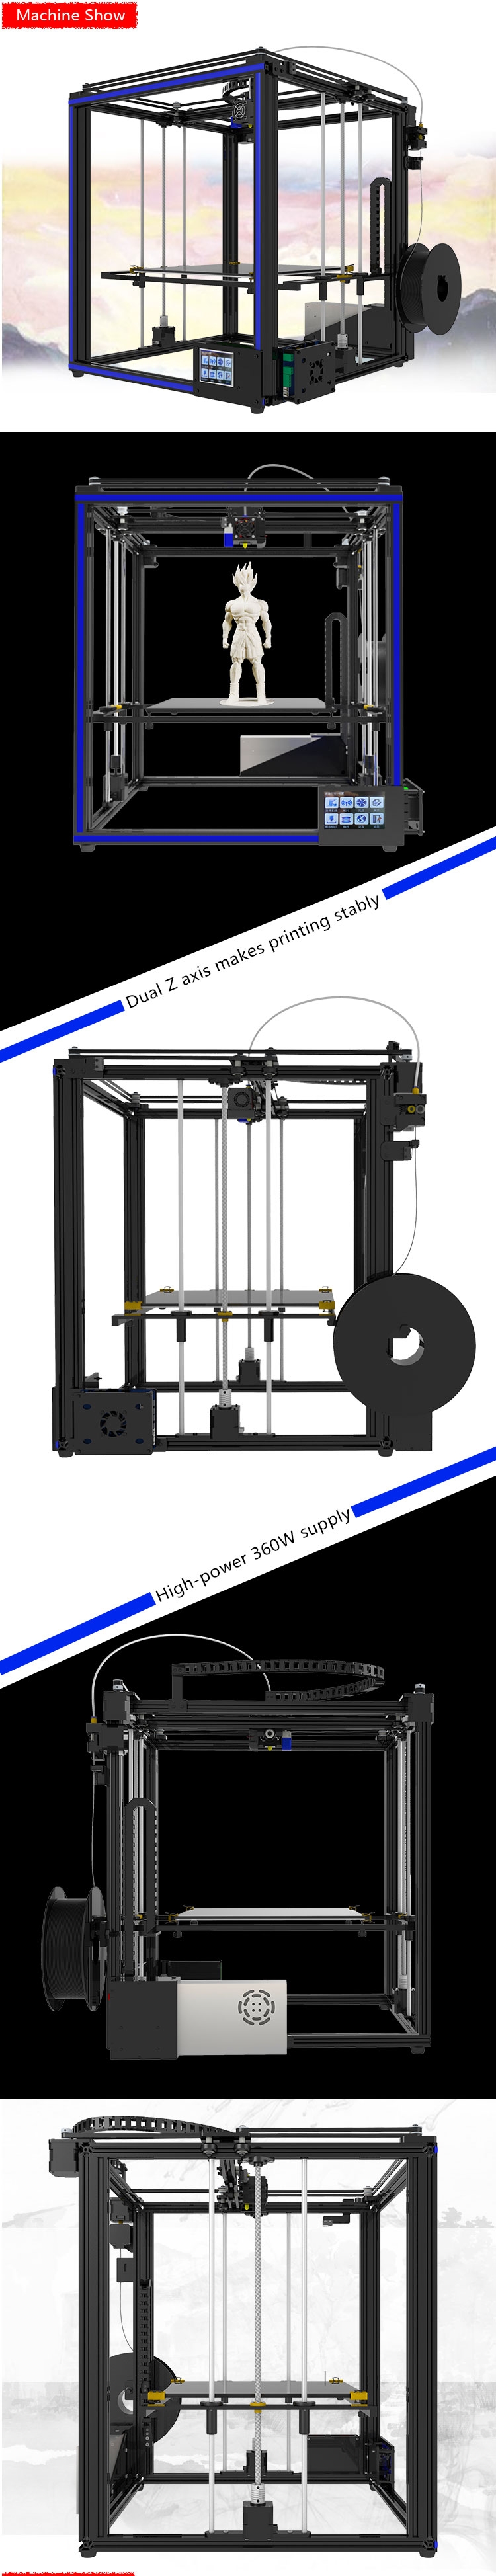 TRONXY® X5SA DIY Aluminium 3D Printer 330*330*400mm Printing Size With Updated Touch Screen/Auto Leveling/Dual Z-axis/Power Resume 24